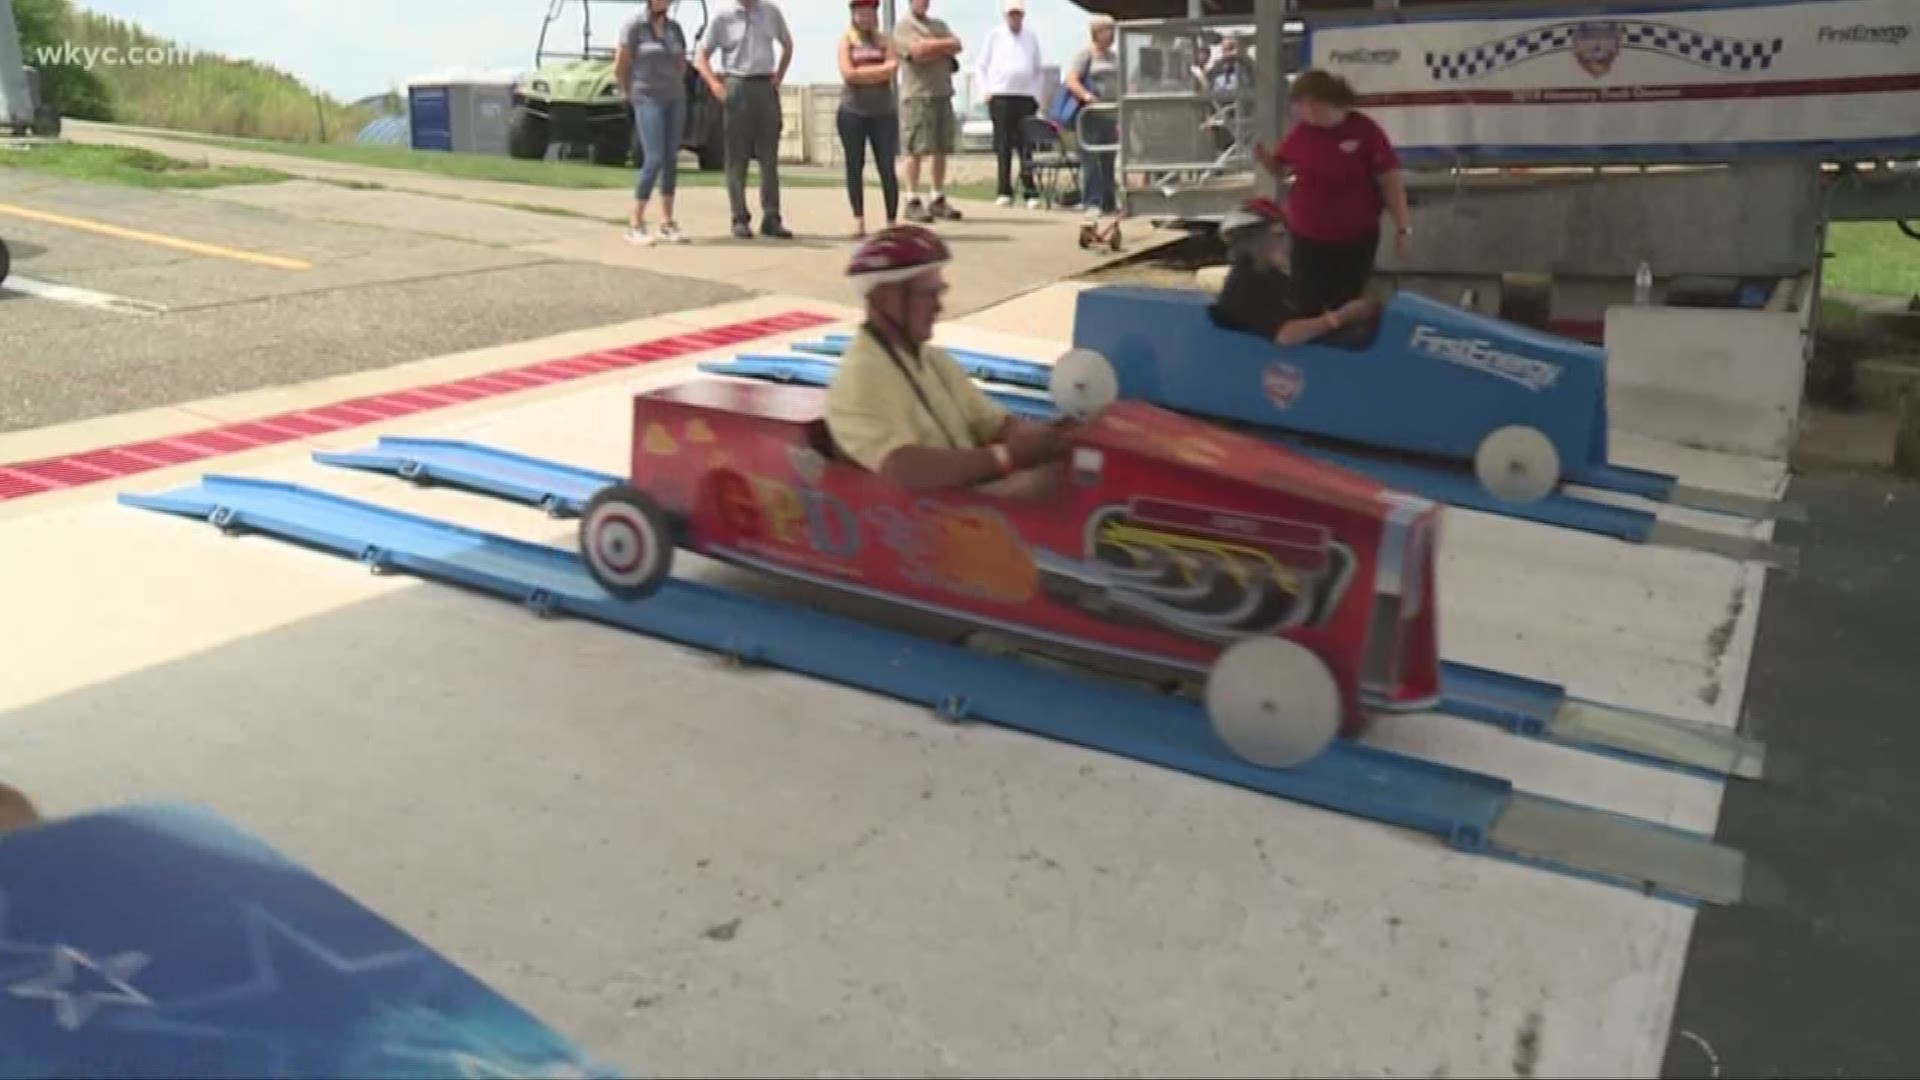 For more than 80 years, the All-American Soap Box Derby has called Akron home. Over the years, thousands have made runs down the big hill. On Thursday, some special folks had the opportunity to take a ride back in time.